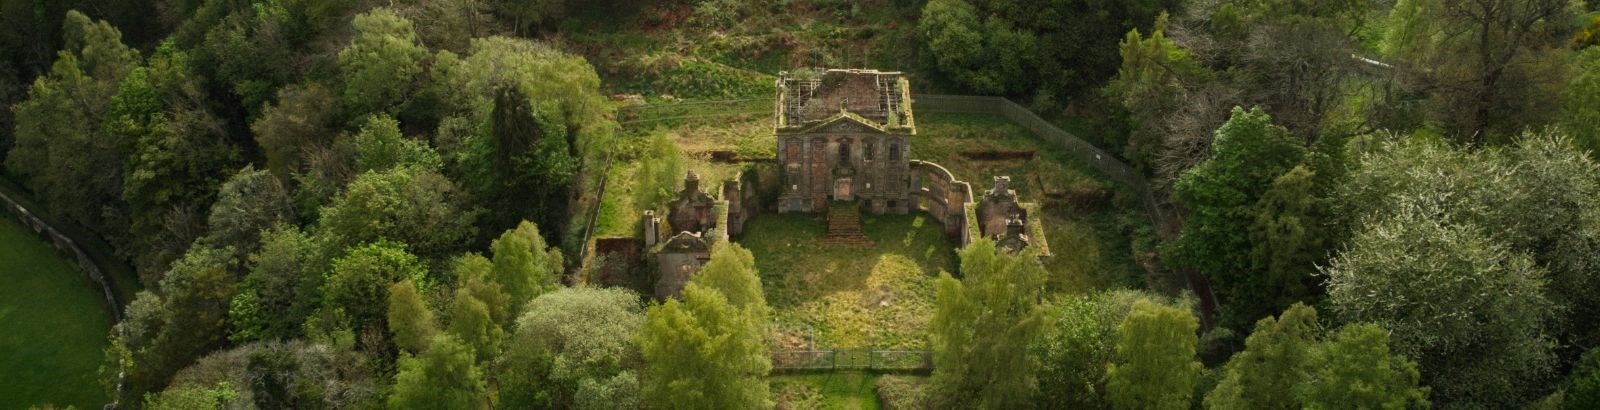 bird's eye view of a derelict building surrounded by trees